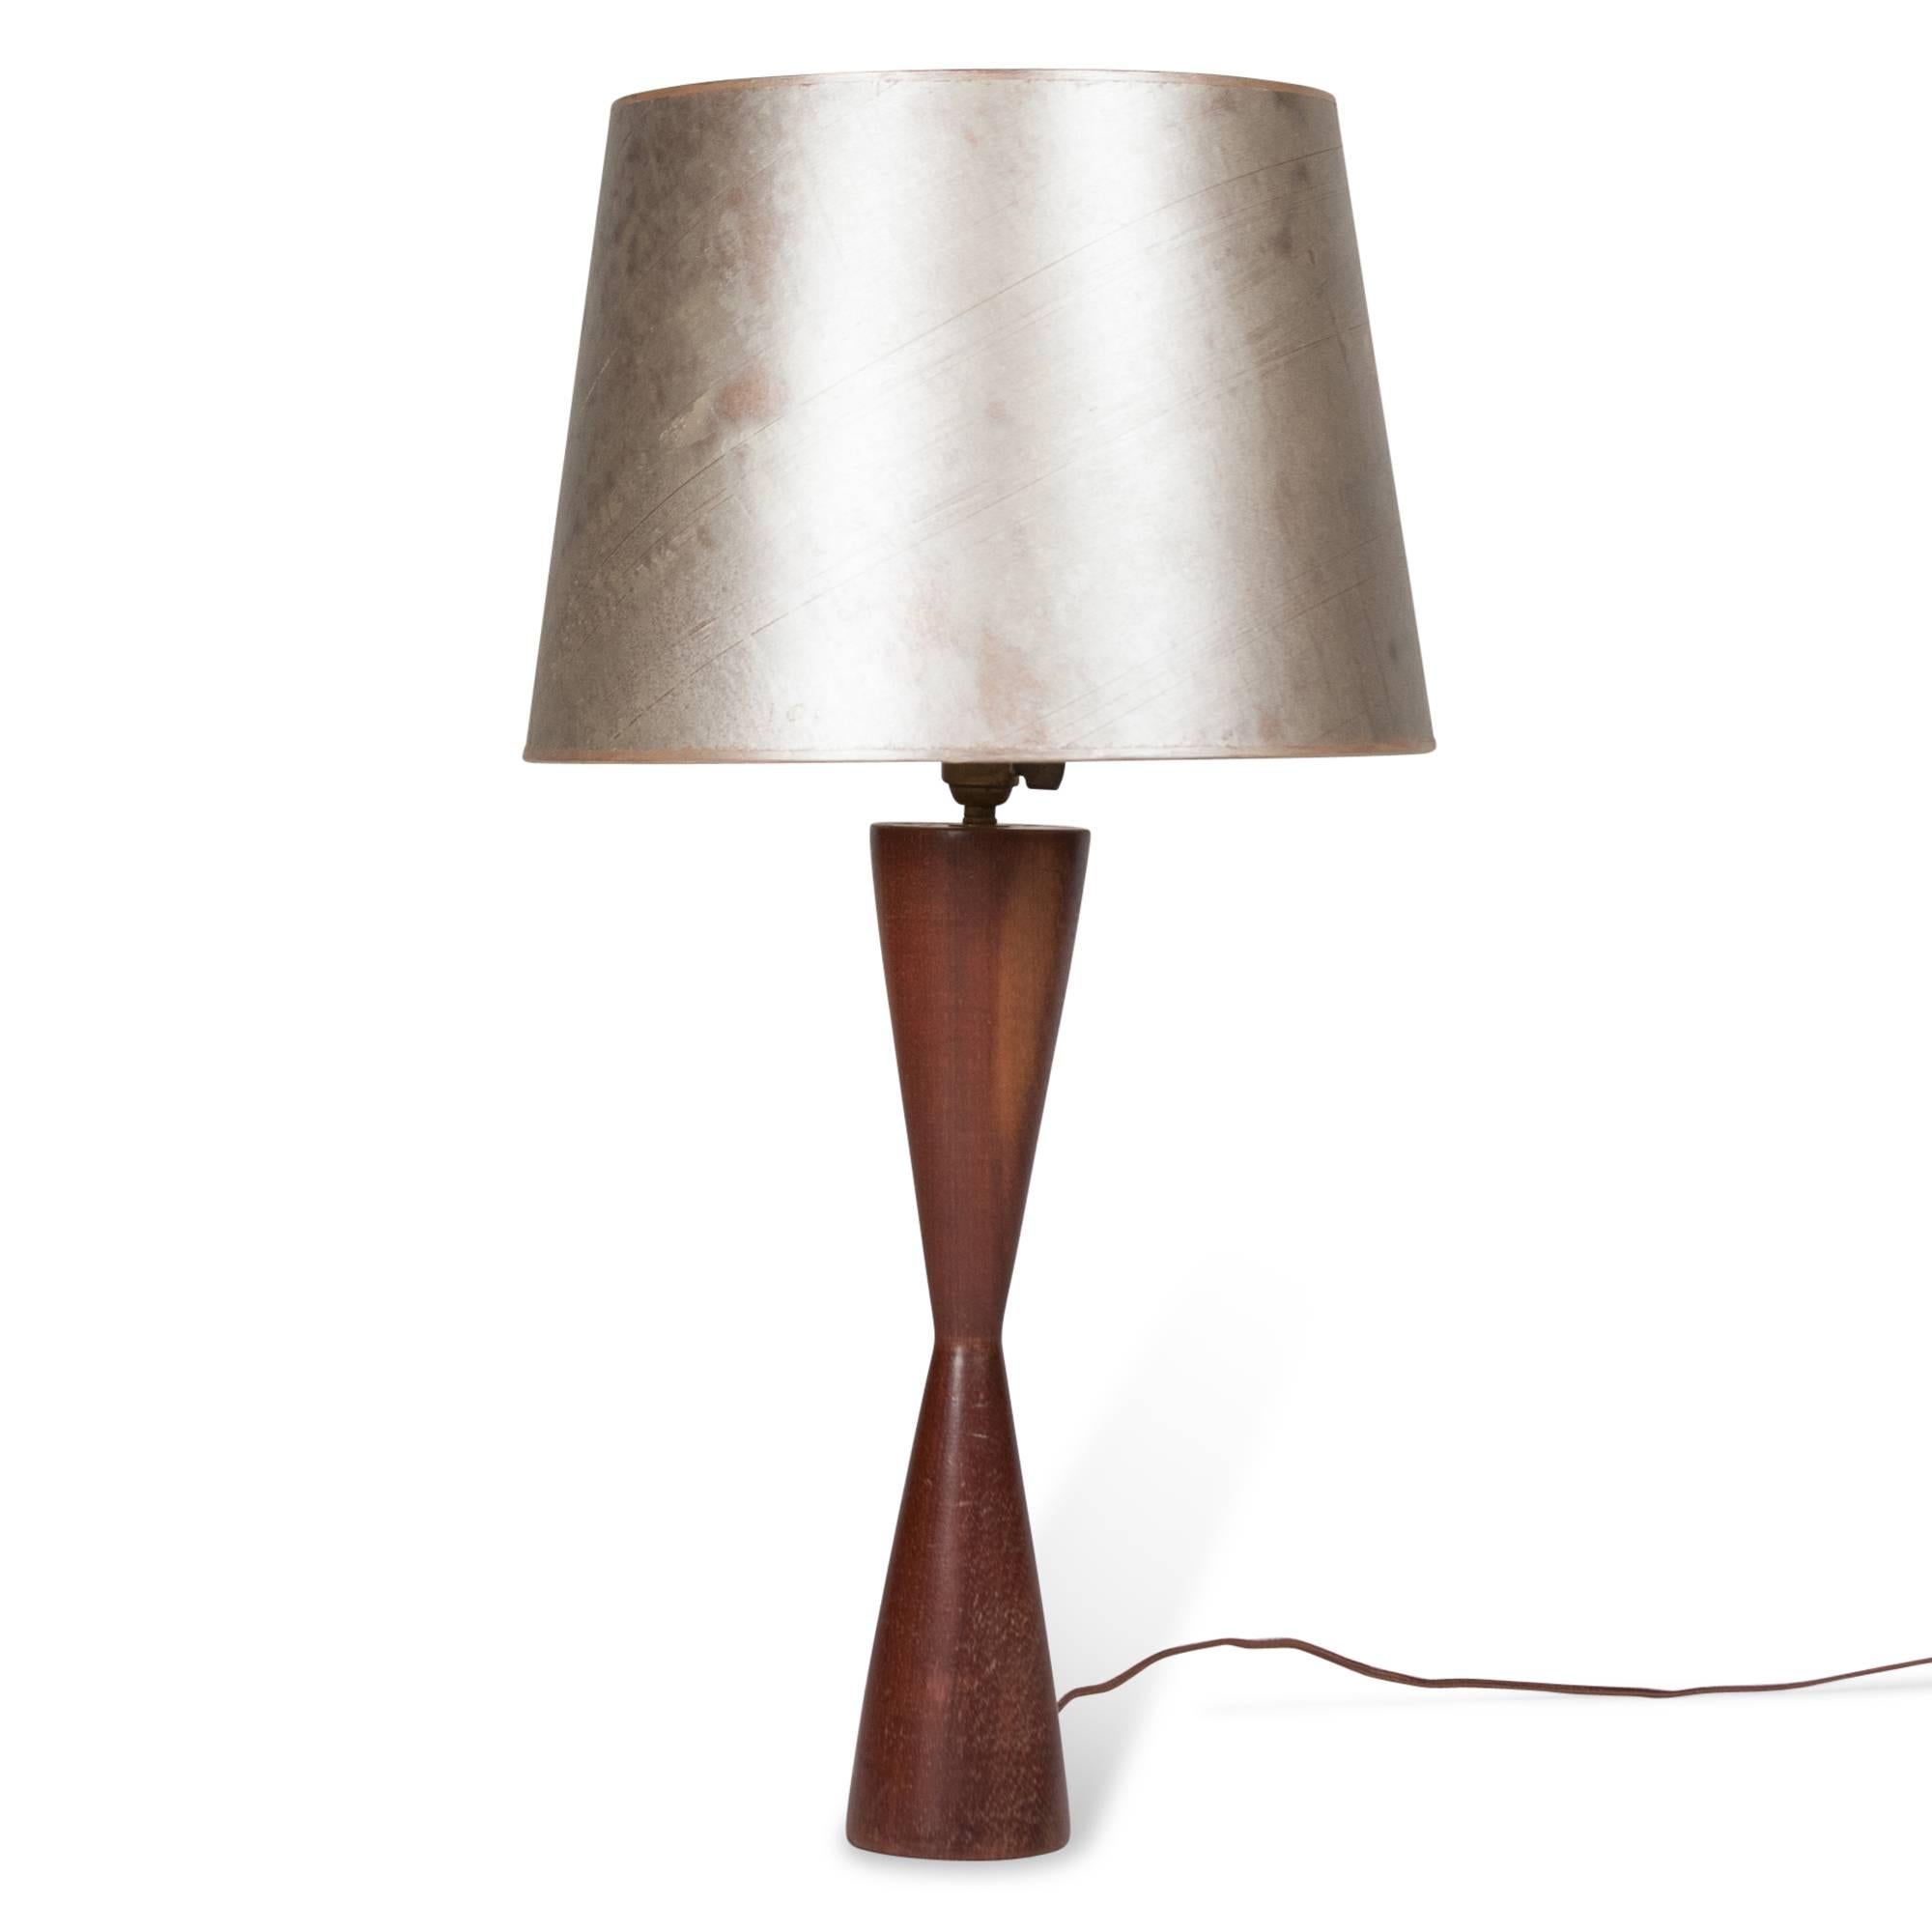 Turned walnut table lamp, in double cone form, one of which is inverted, Danish, 1950s. In silvered paper shade. Measures: 3.5” D base, 14.25” D shade at widest, 27” H. (Item #3311)